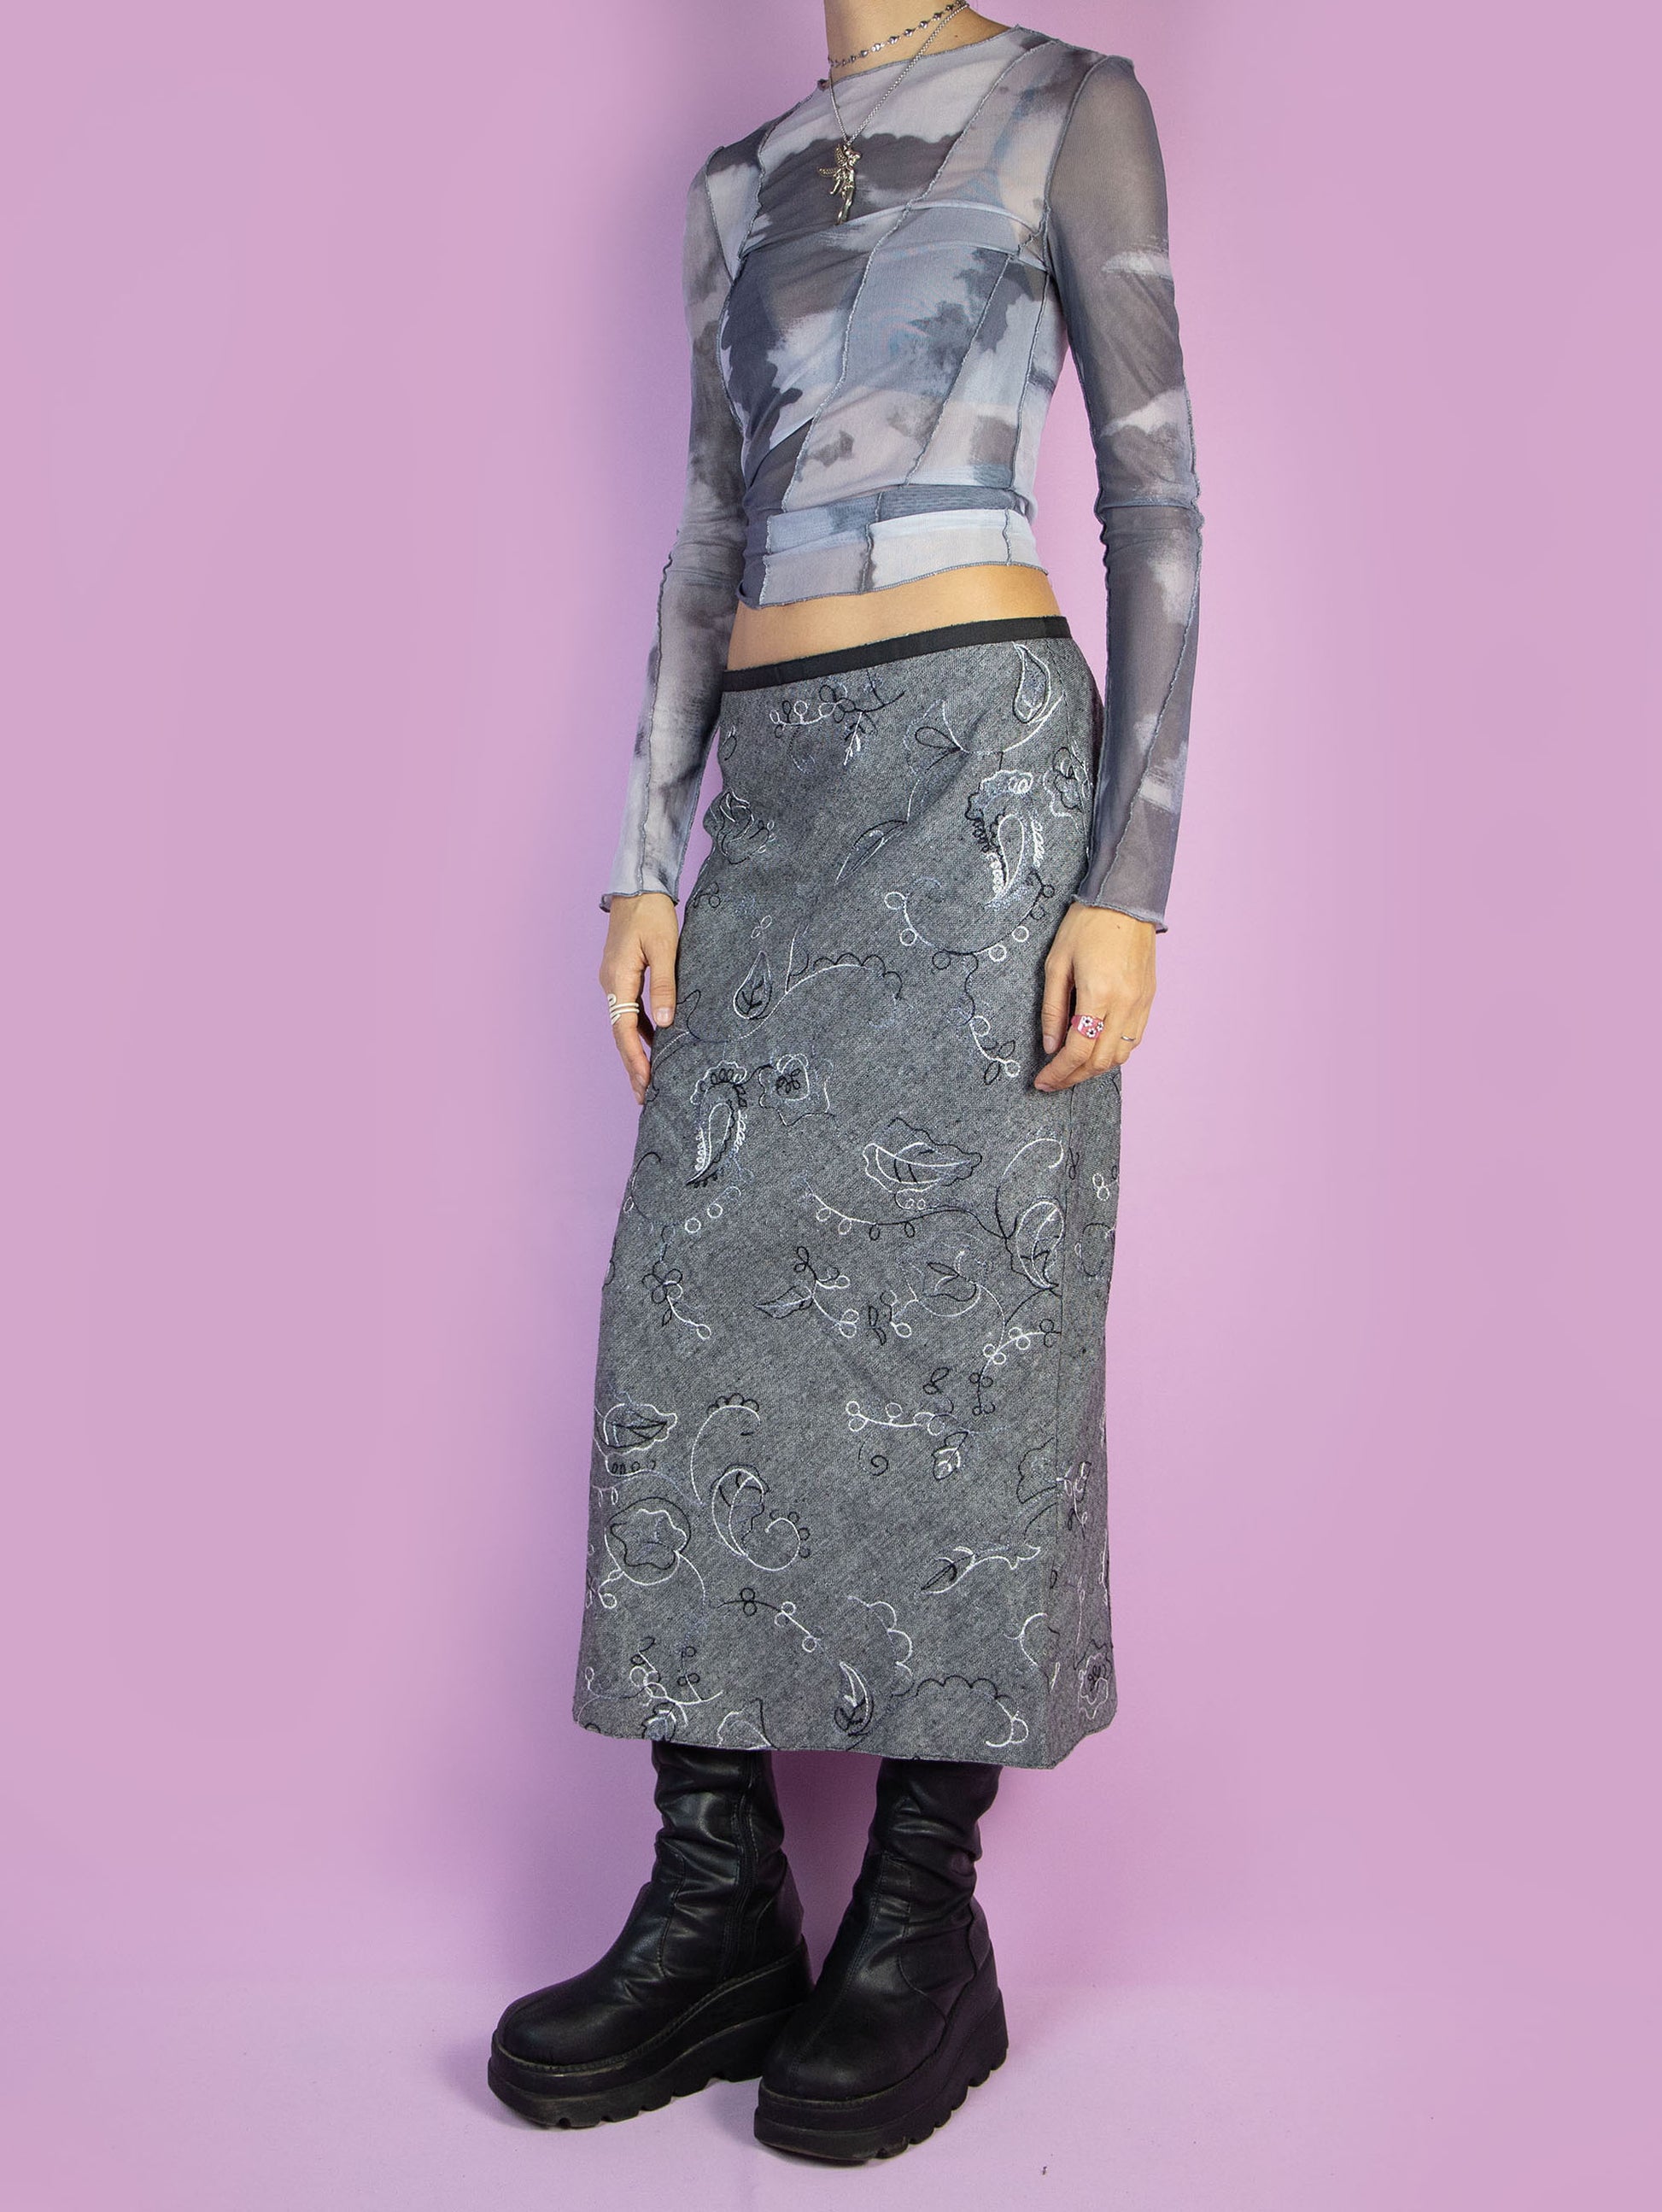 The Vintage 90s Gray Trumpet Midi Skirt is a boho fairy grunge inspired knitted skirt with embroidered floral paisley details and a back zipper closure. Excellent vintage condition.